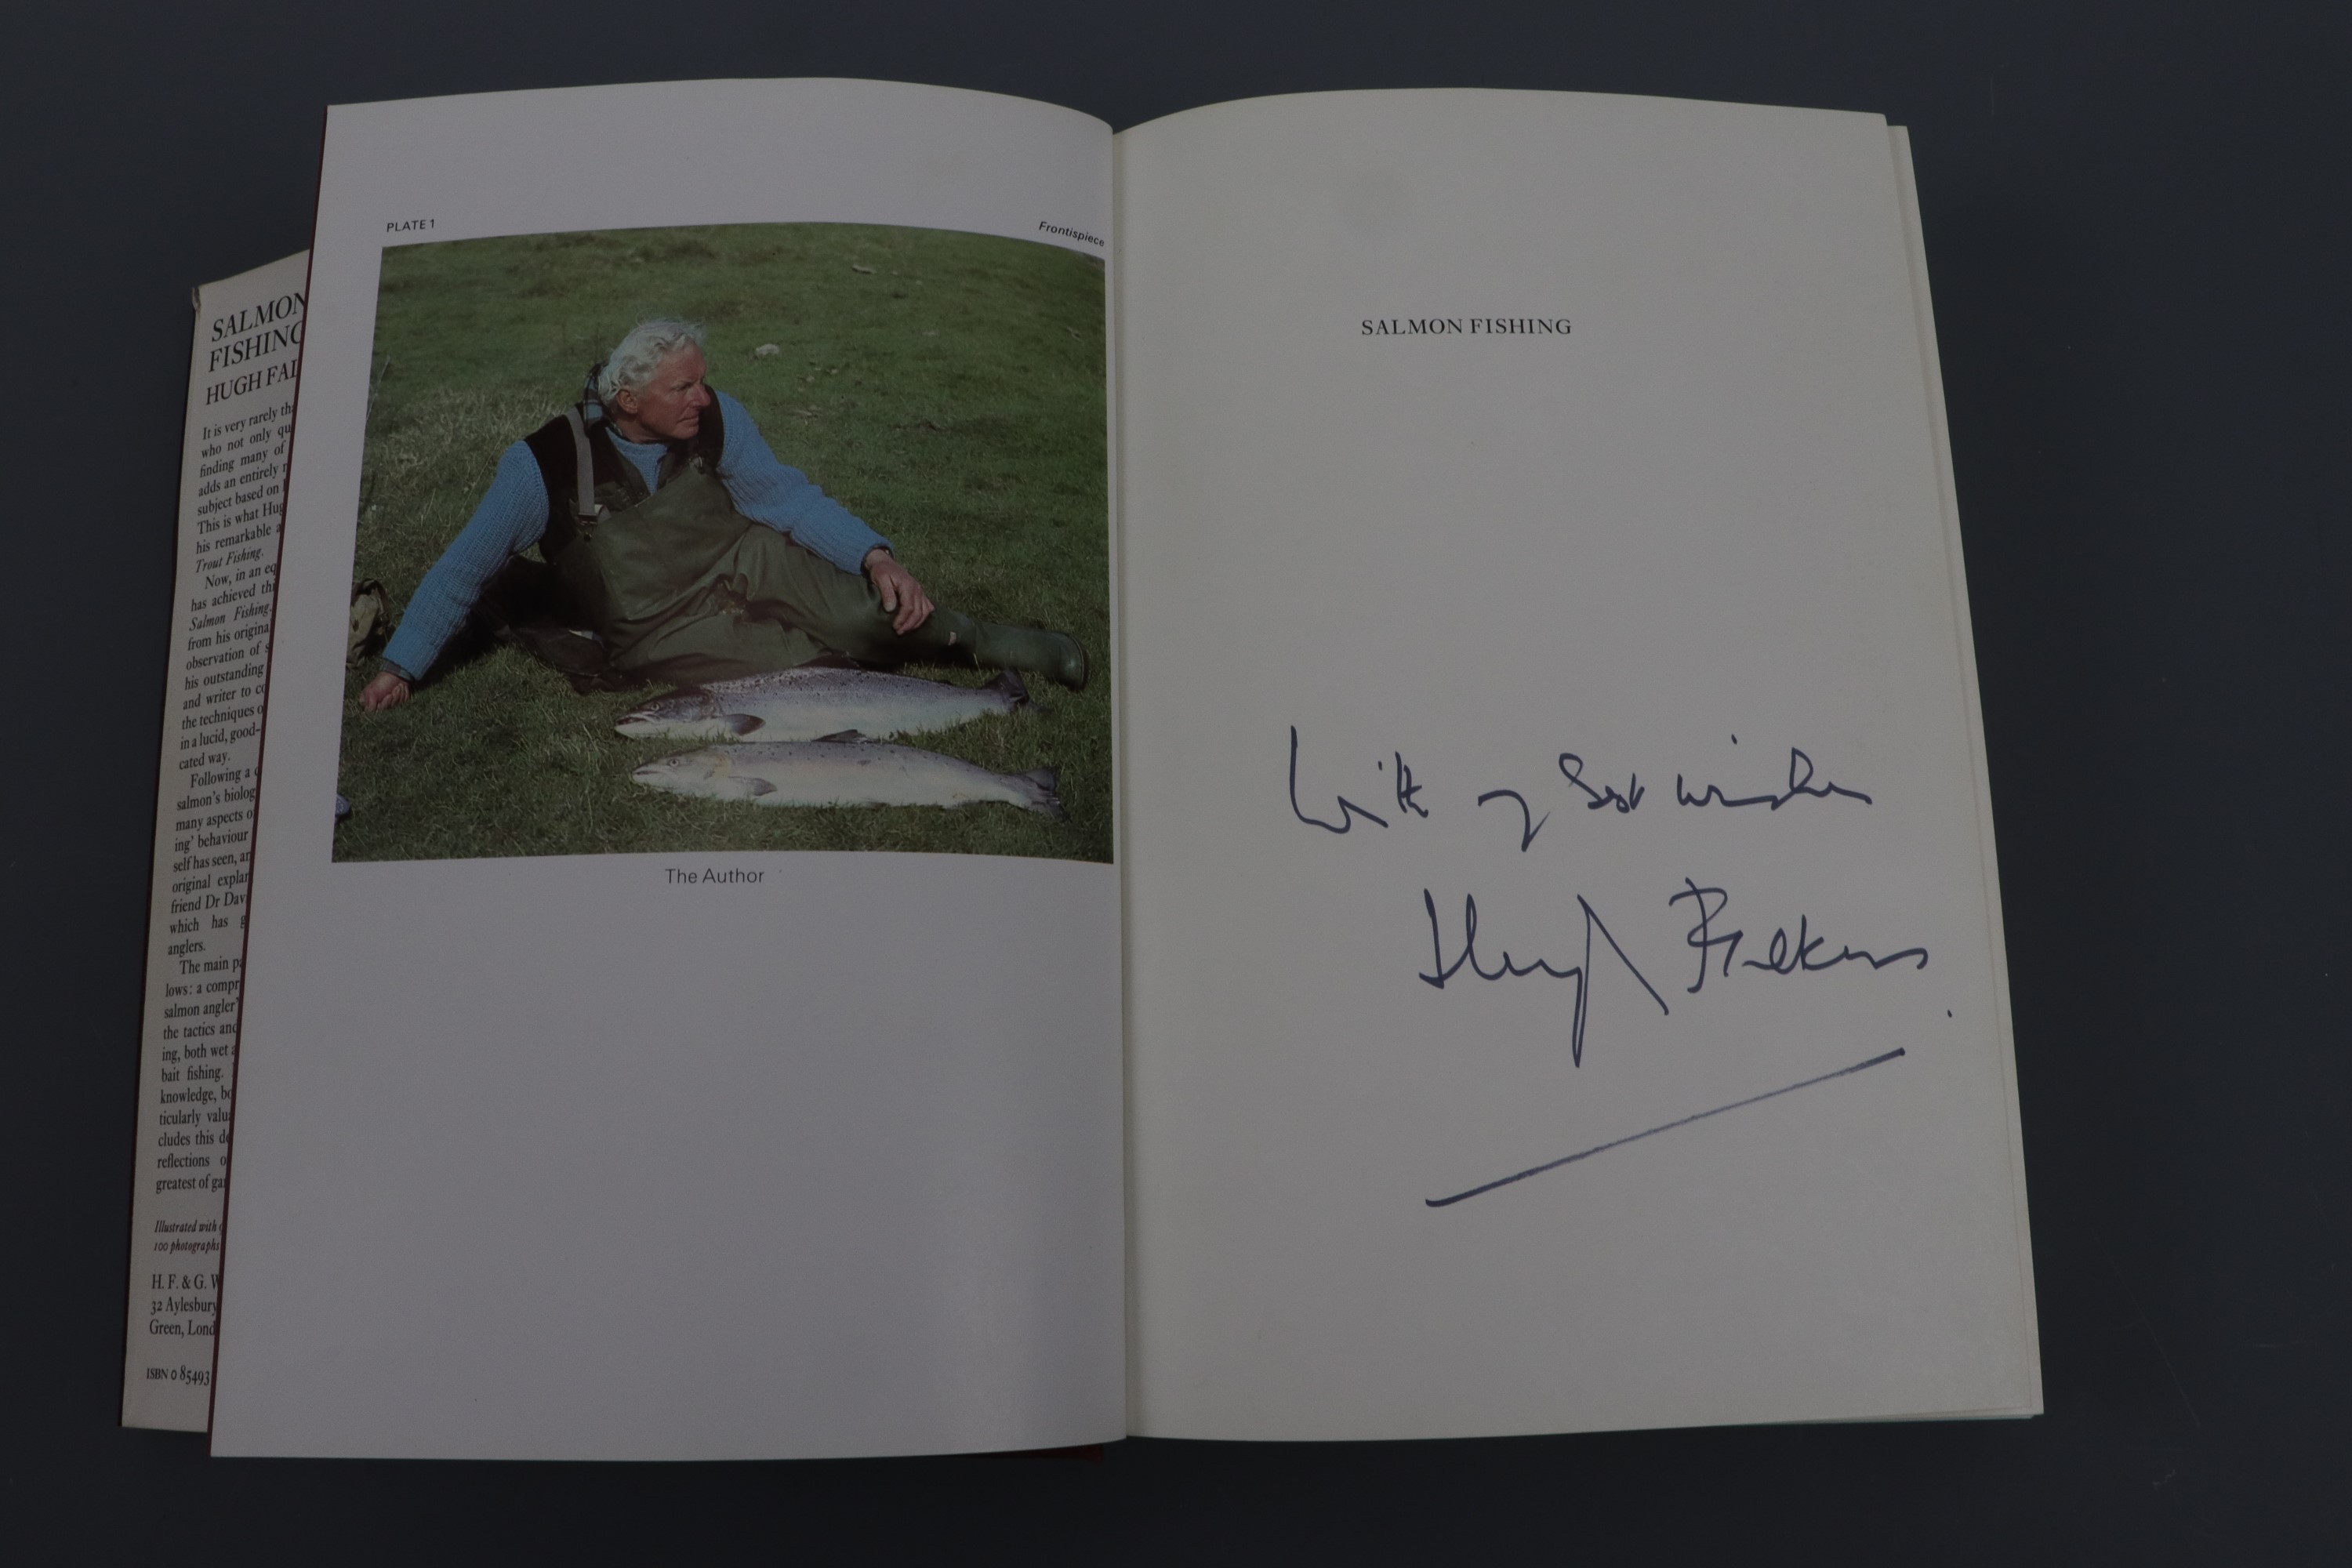 An author-inscribed presentation copy of Hugh Falkus', Salmon Fishing, a Practical Guide, 1984 - Image 2 of 3